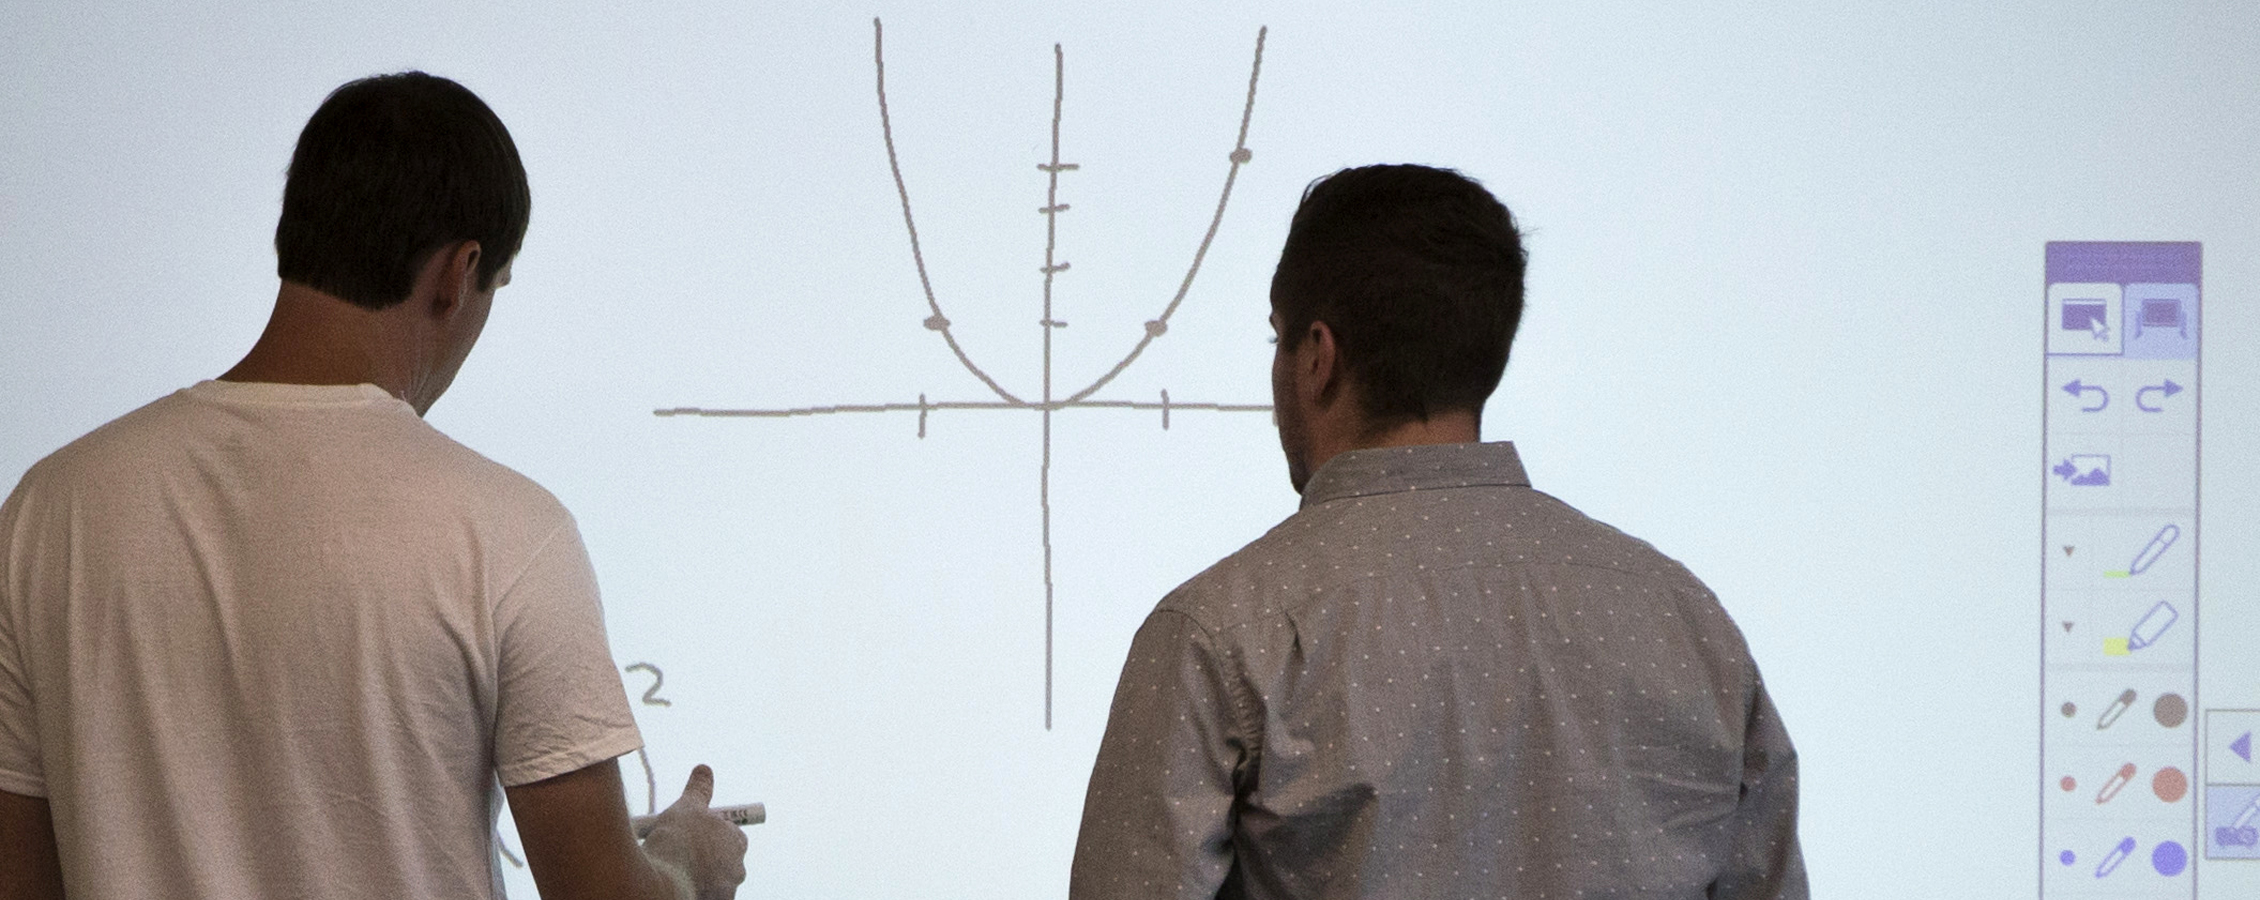 Two people work together at a white board, looking at a graph.